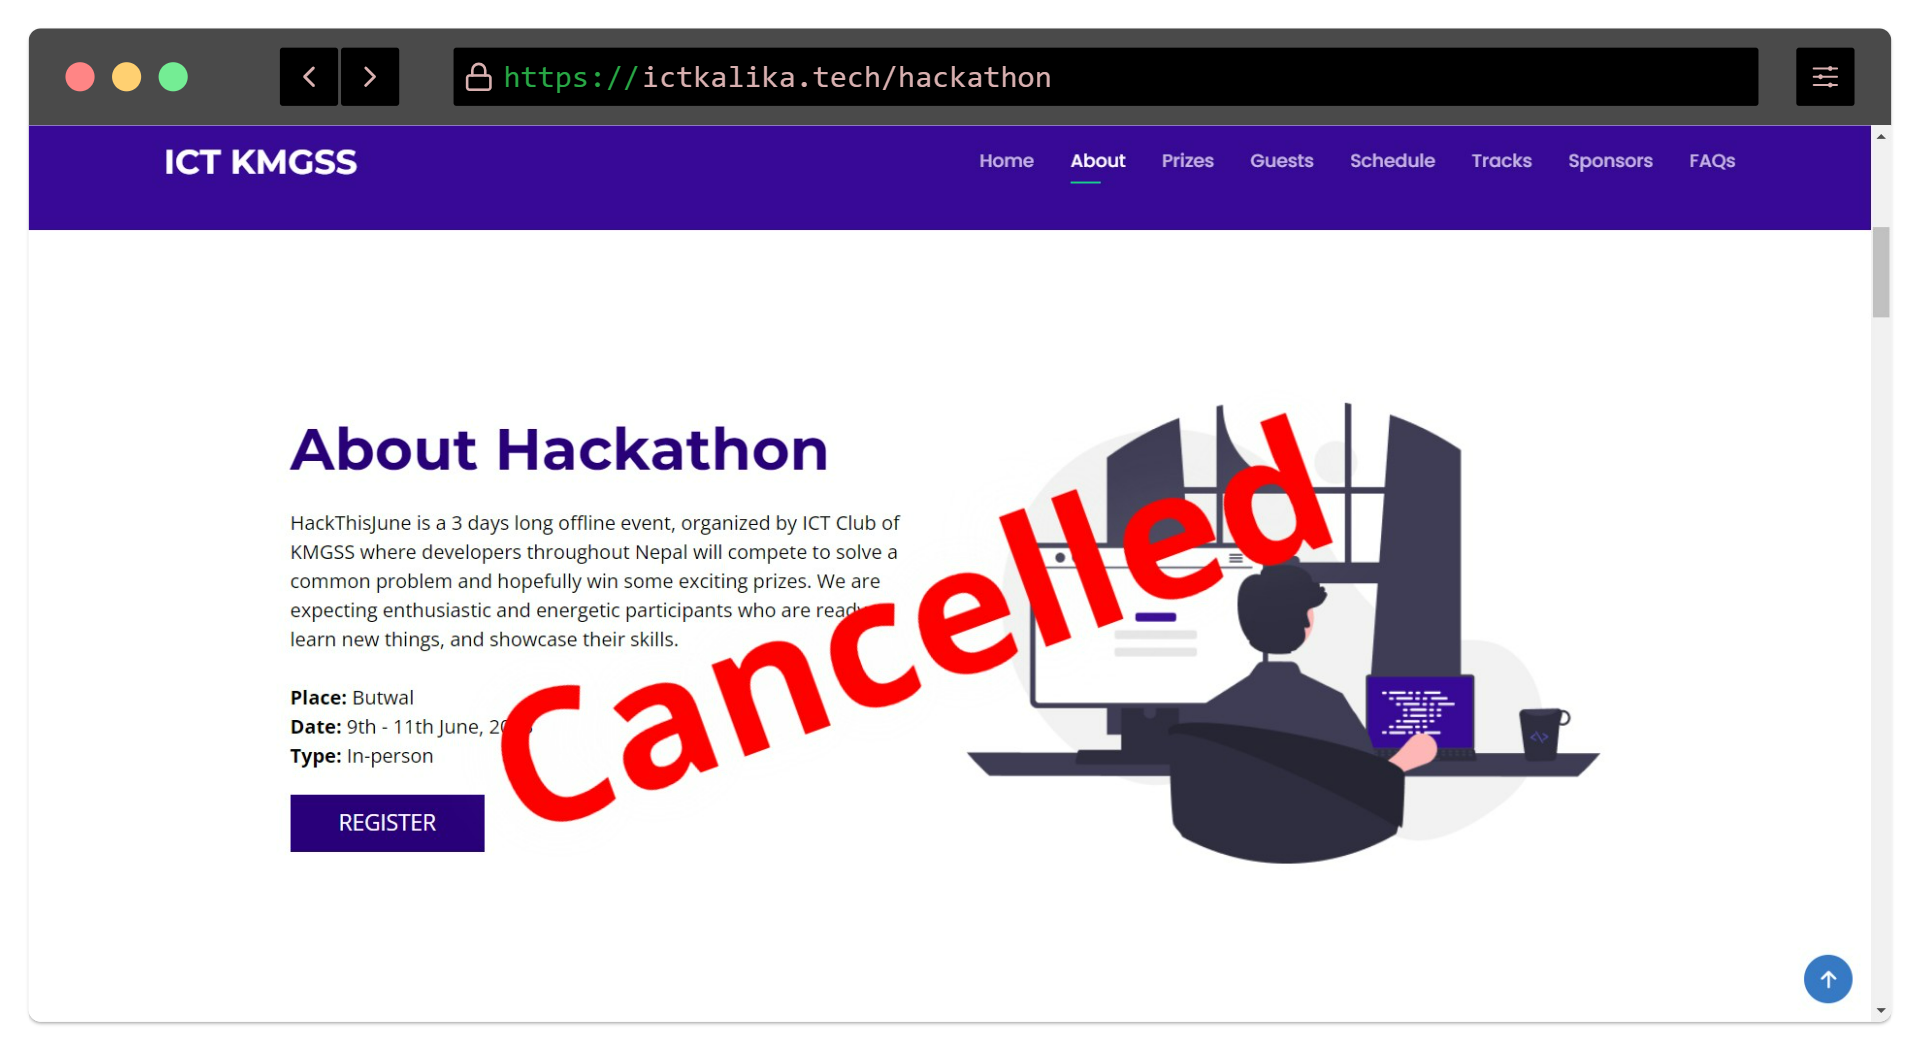 HackthisJune Hackathon by ICT club of KMGSS got cancelled